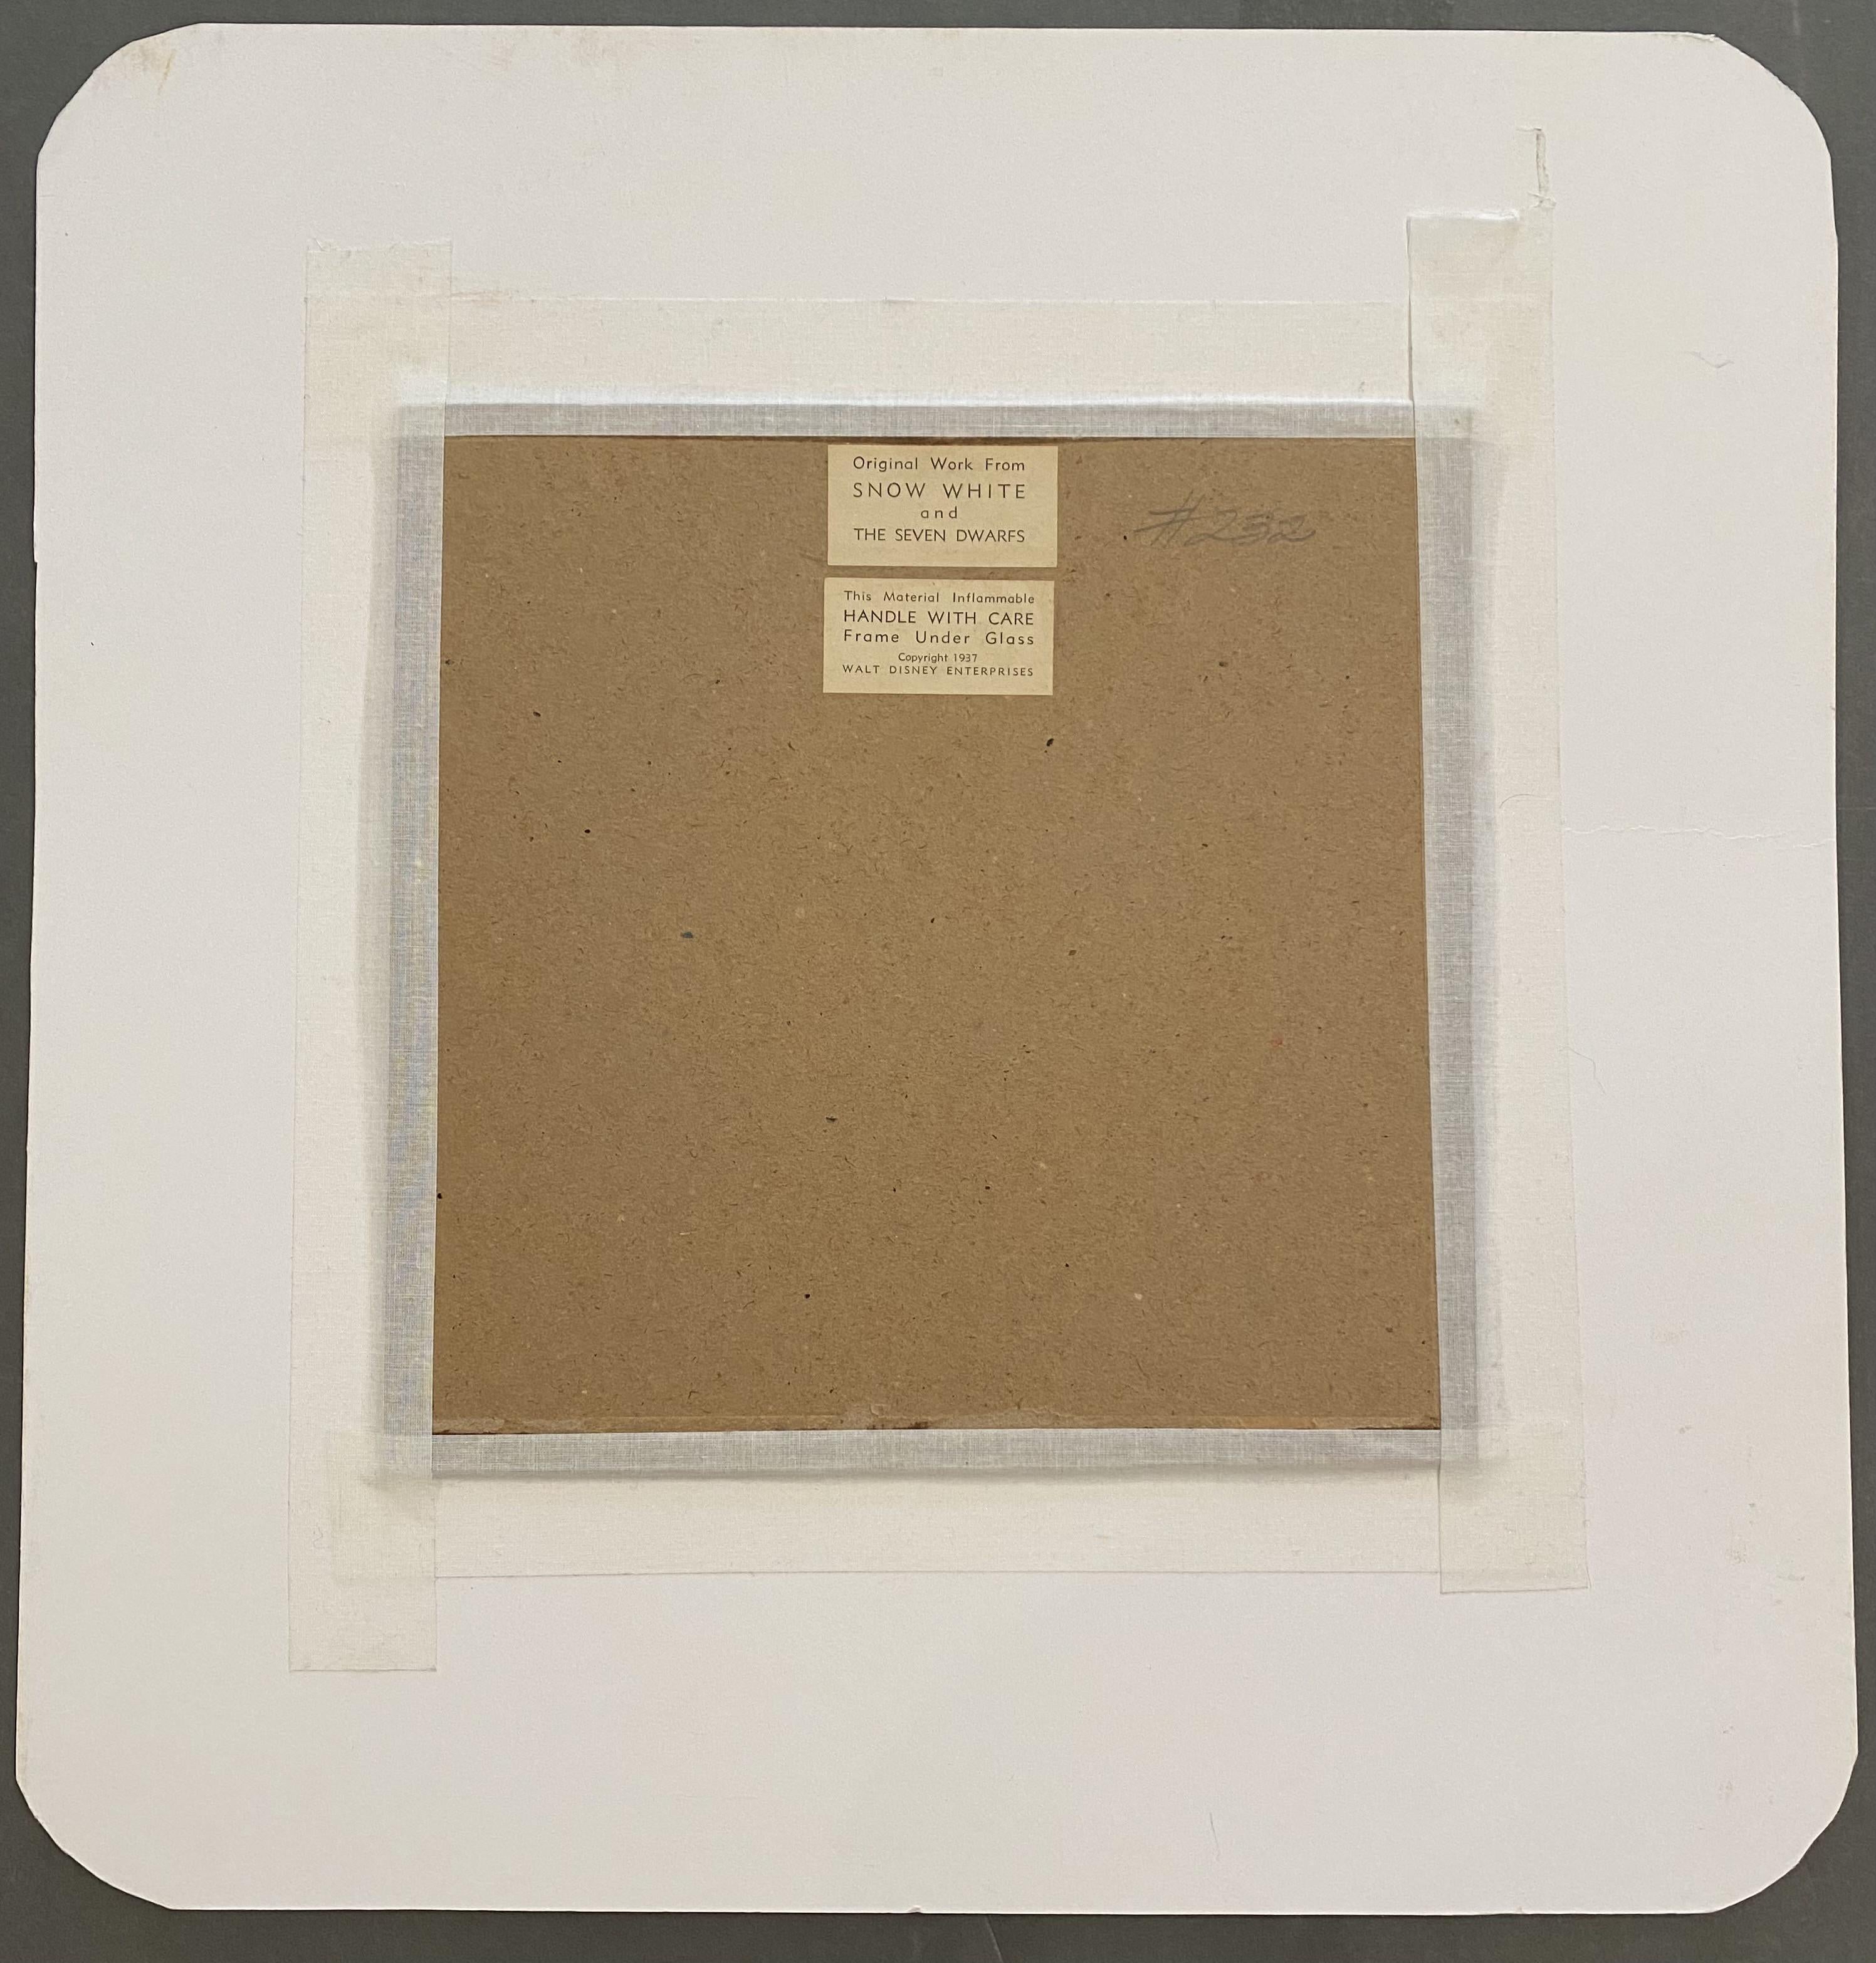 Studio: Walt Disney
Medium: Production cel on Courvoisier background
Film: Snow White and the Seven Dwarfs
Year: 1937
Characters: Doc
Edition: One of a kind
Unframed Size: 4 1/2